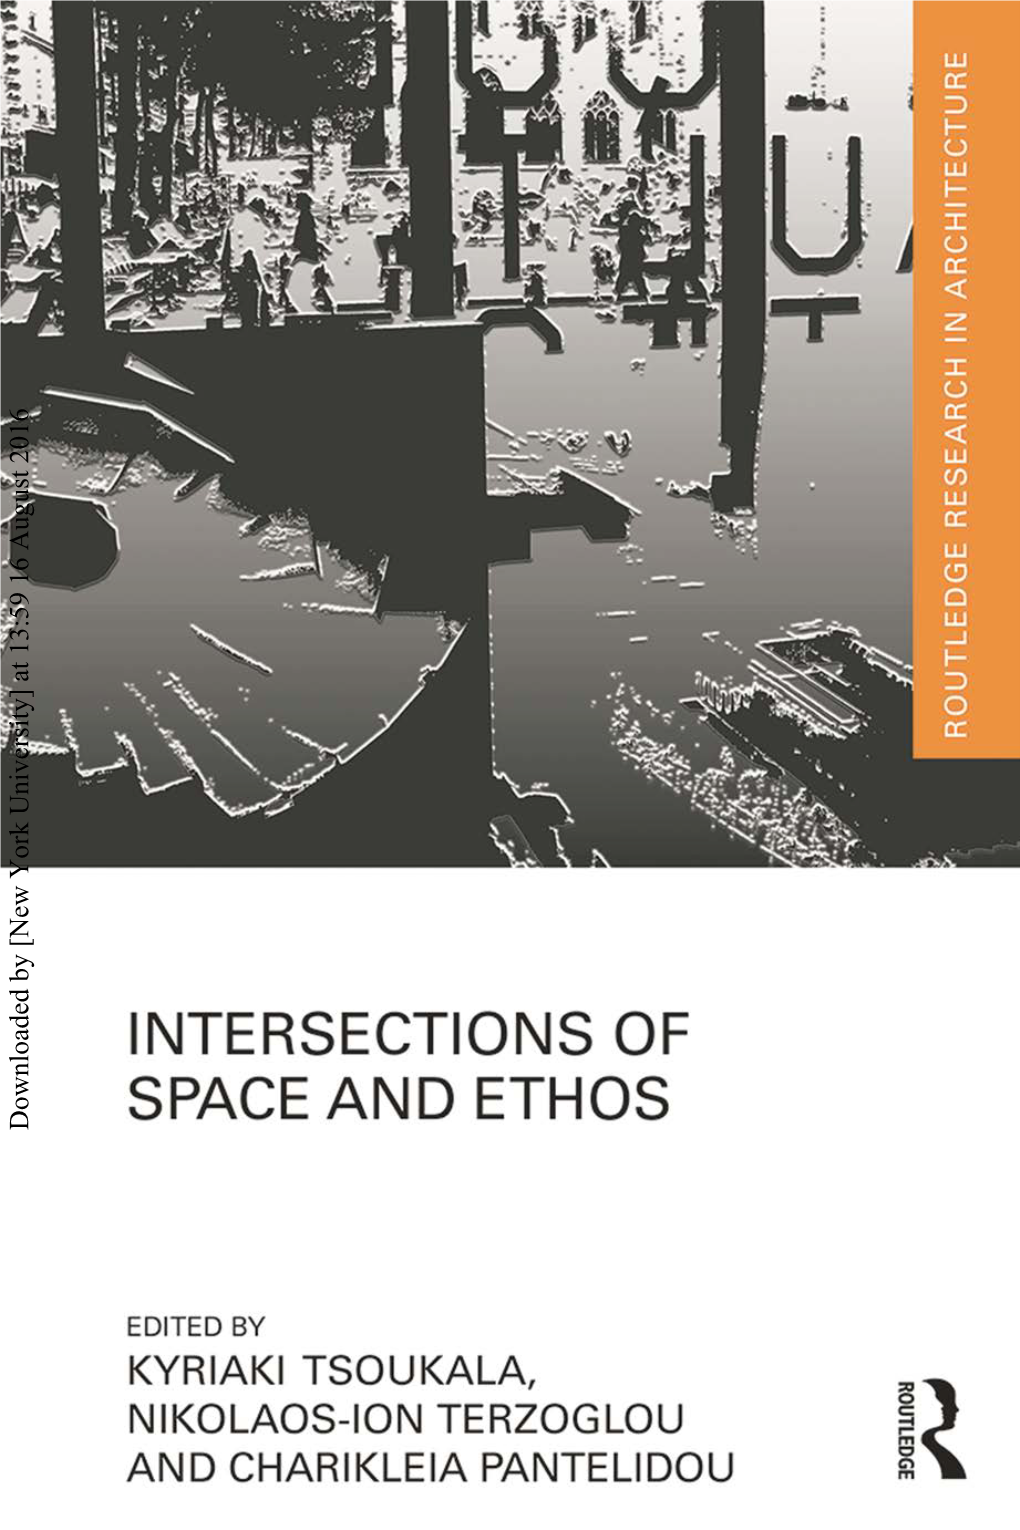 Downloaded by [New York University] at 13:59 16 August 2016 Intersections of Space and Ethos